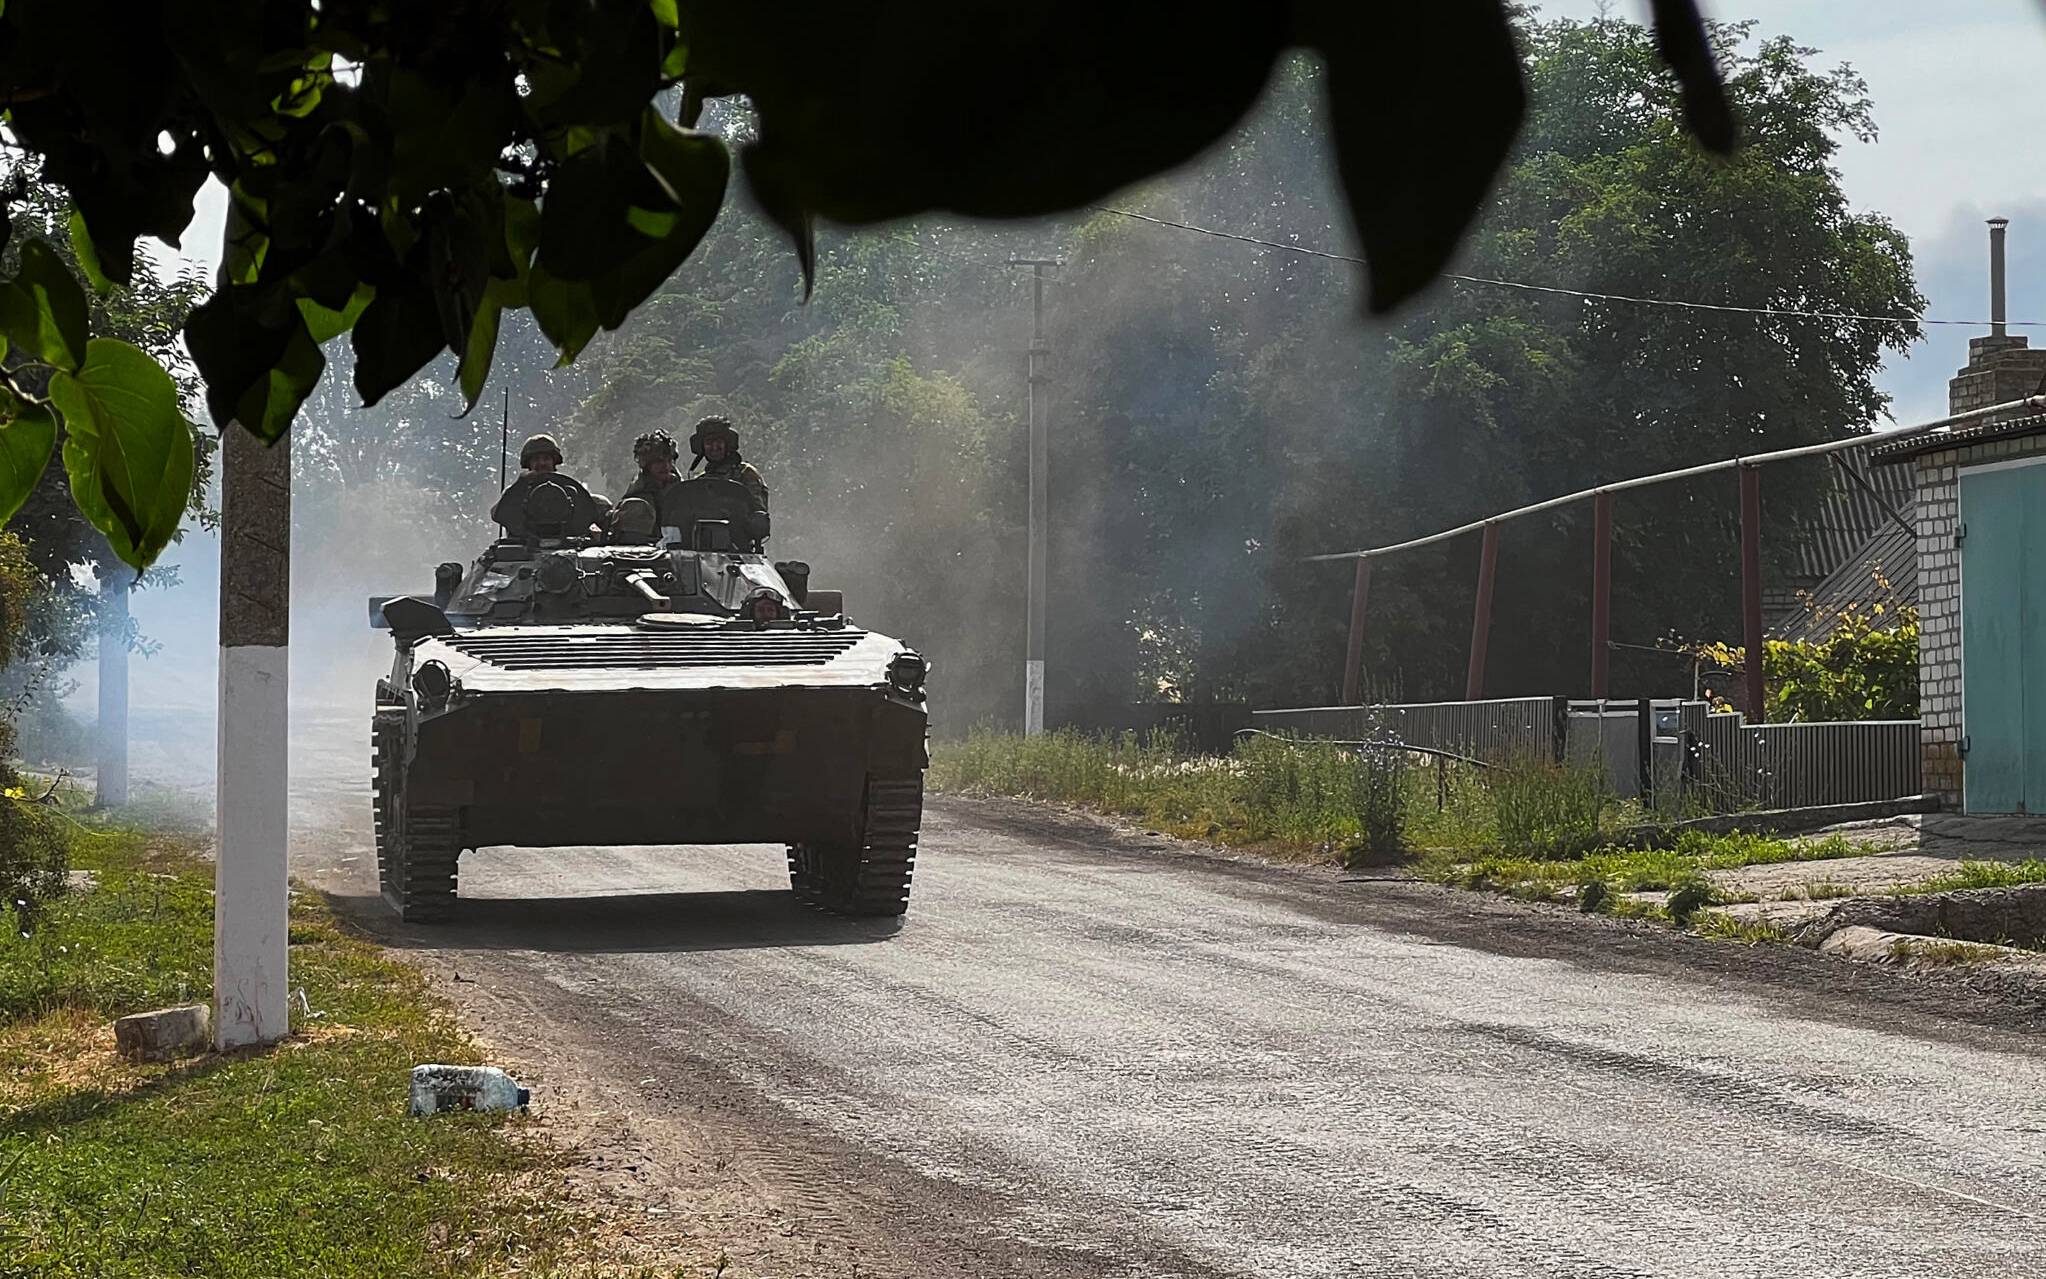 Ukrainian soldiers ride an armoured vehicle on the main road to Lysychansk in Ukraines eastern region of Donbas on June 26, 2022. - Russian forces achieved major military successes in eastern Ukraine on June 25, 2022, fully capturing the strategic city of Severodonetsk after a fierce battle and entering the nearby city of Lyssychansk, as the conflict entered its fifth month. (Photo by Bagus SARAGIH / AFP)